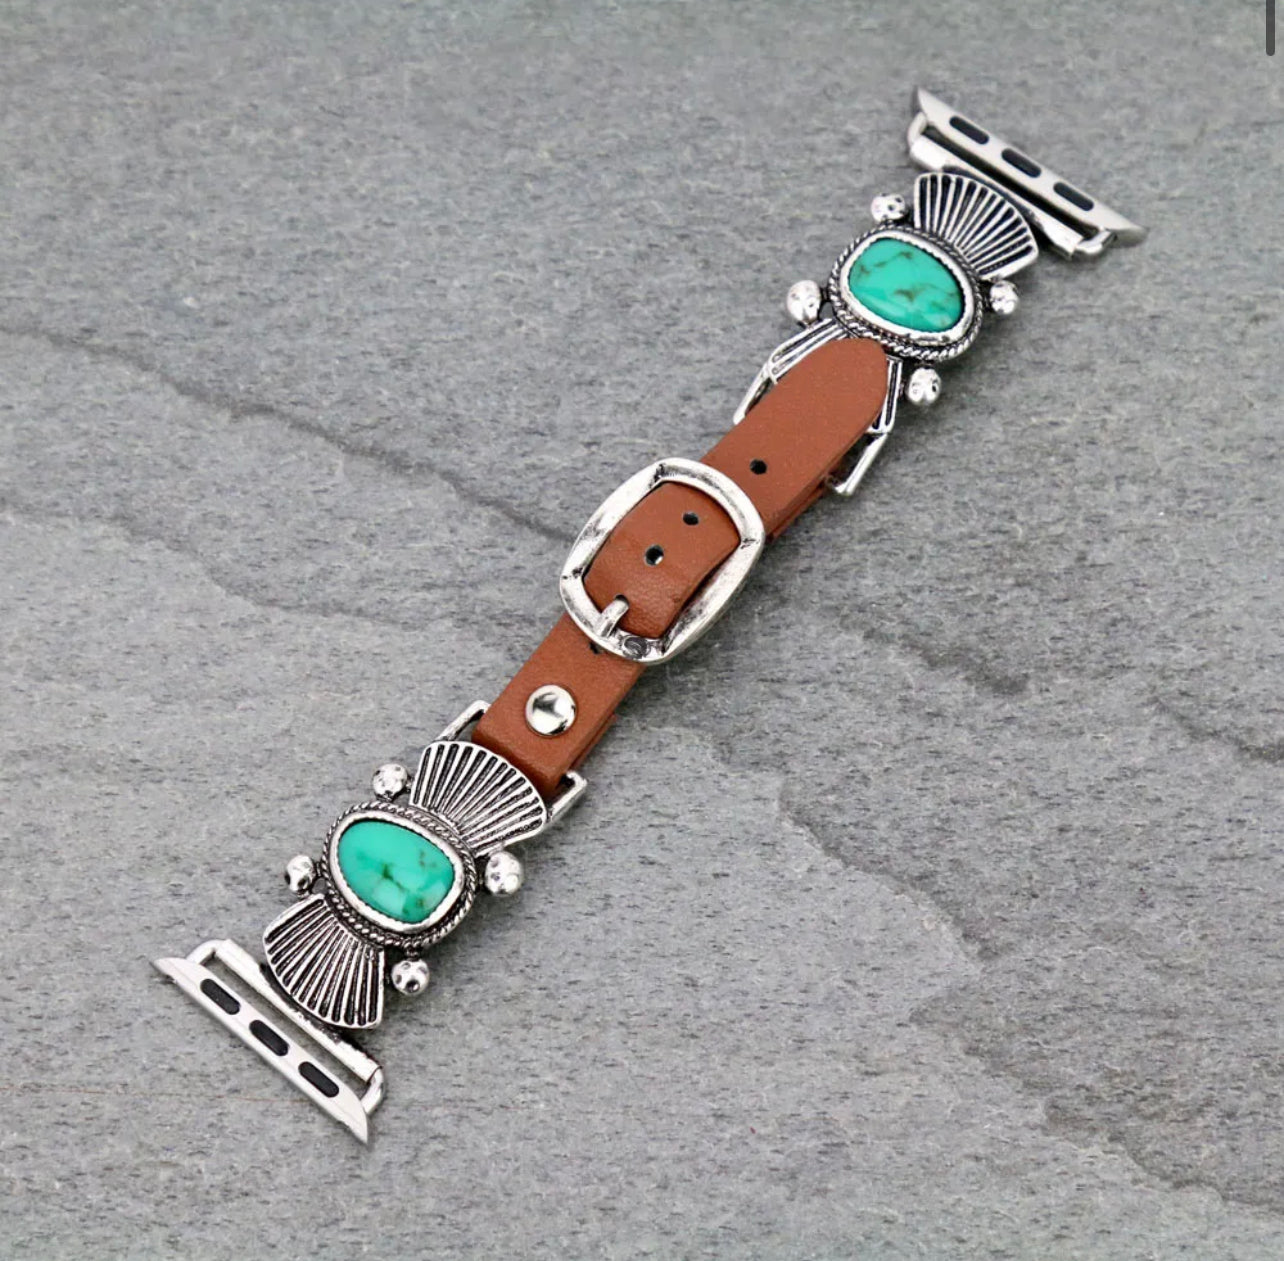 The Ledoux Watch Band